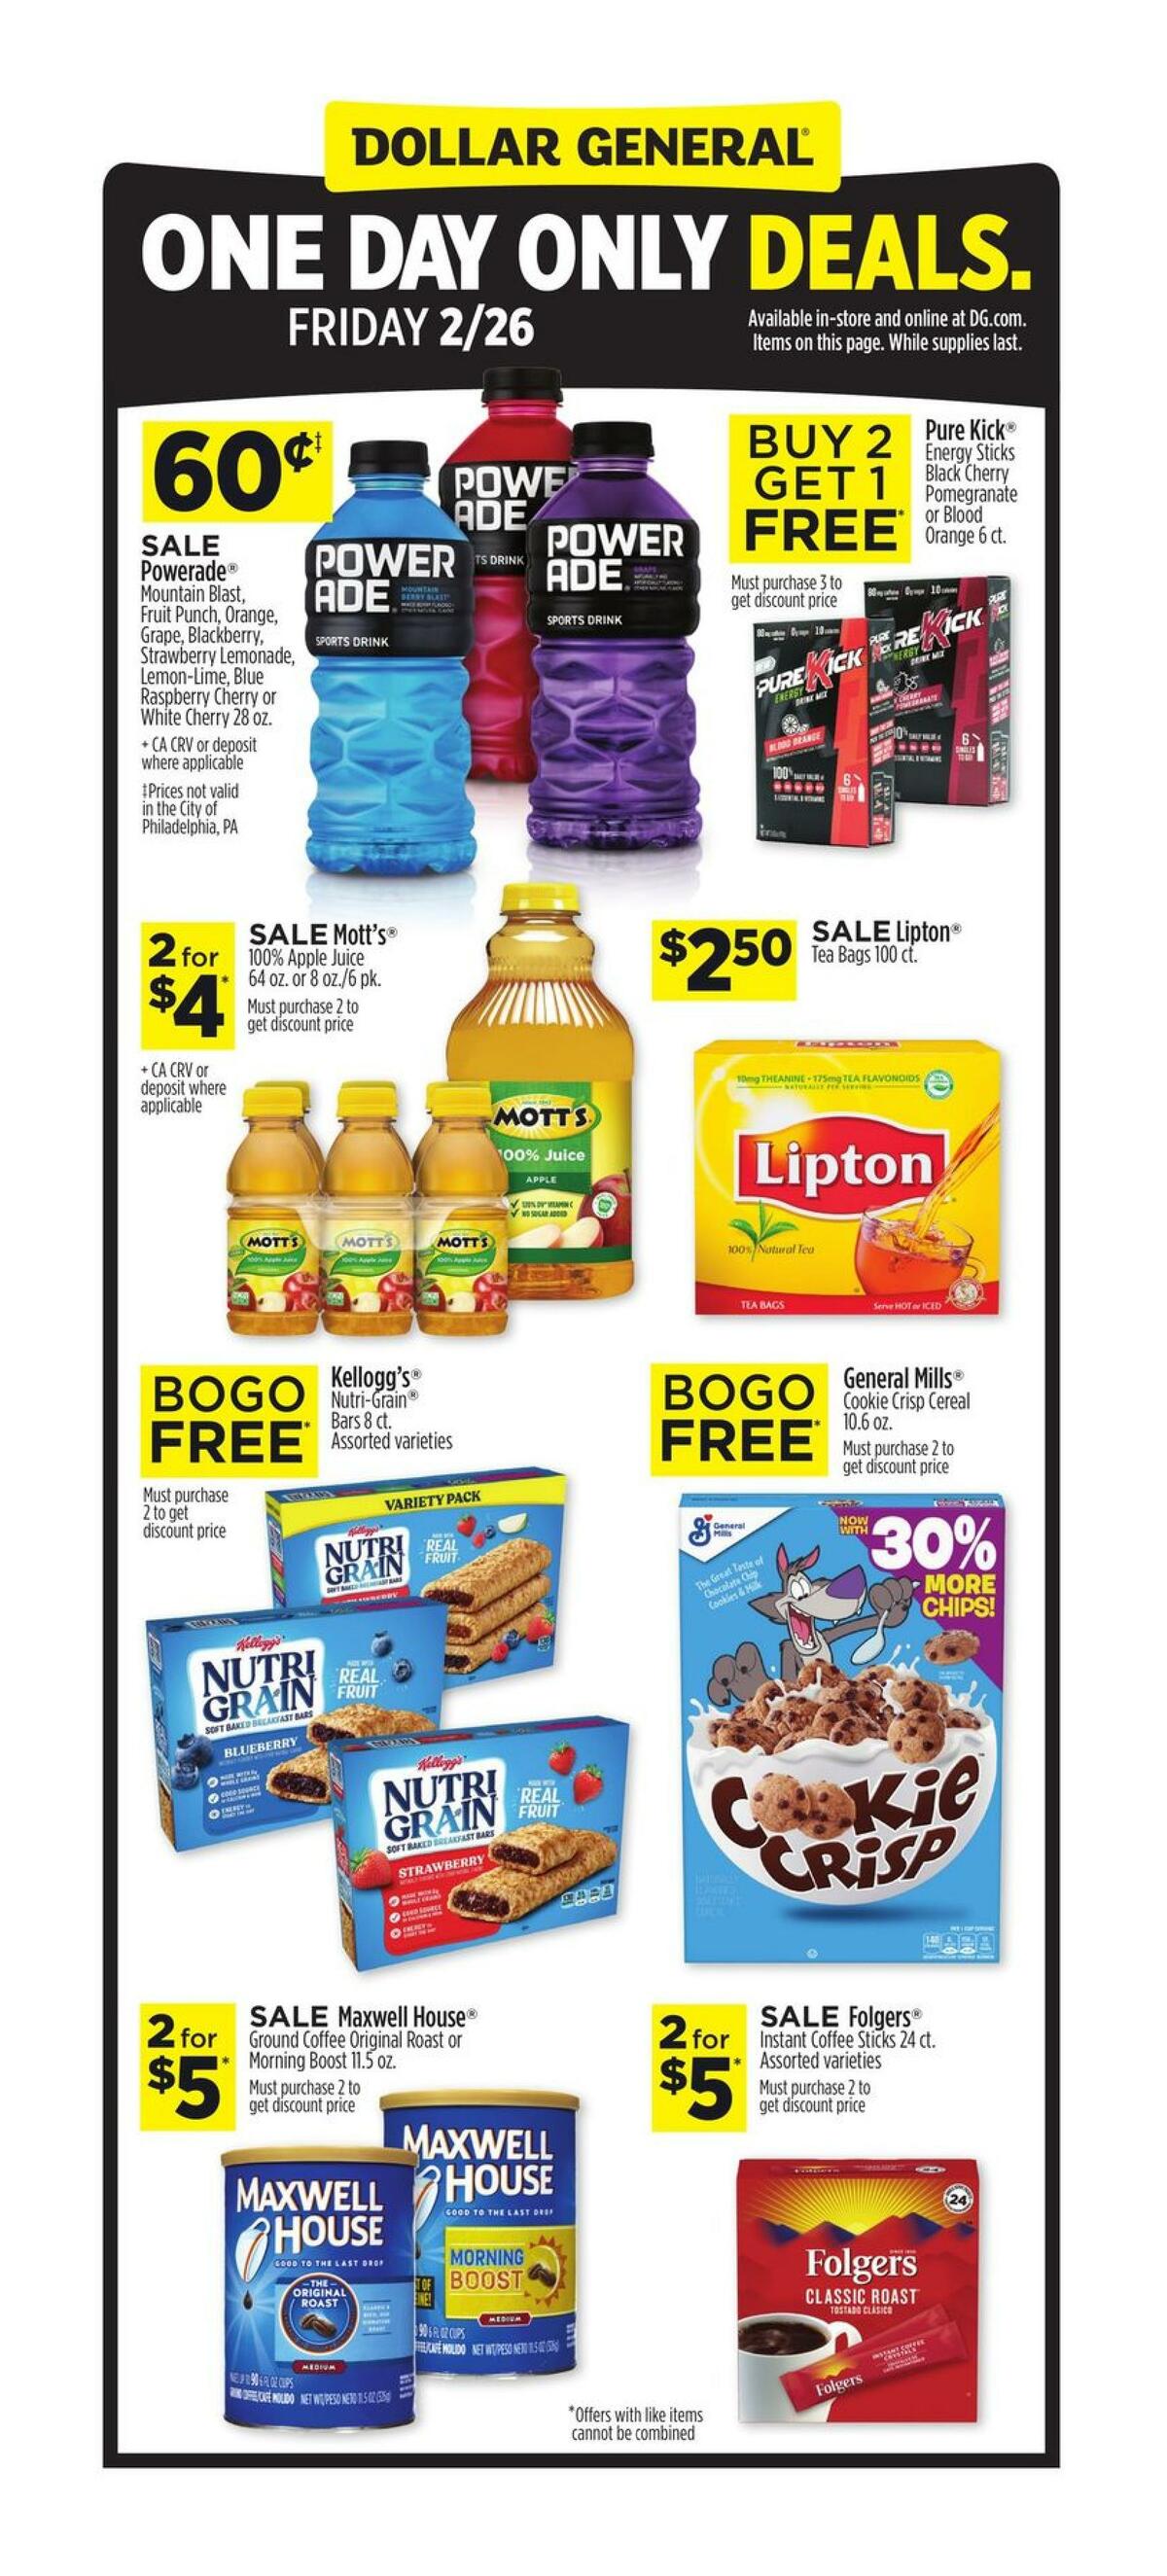 Dollar General One Day Only Deals Weekly Ad from February 26